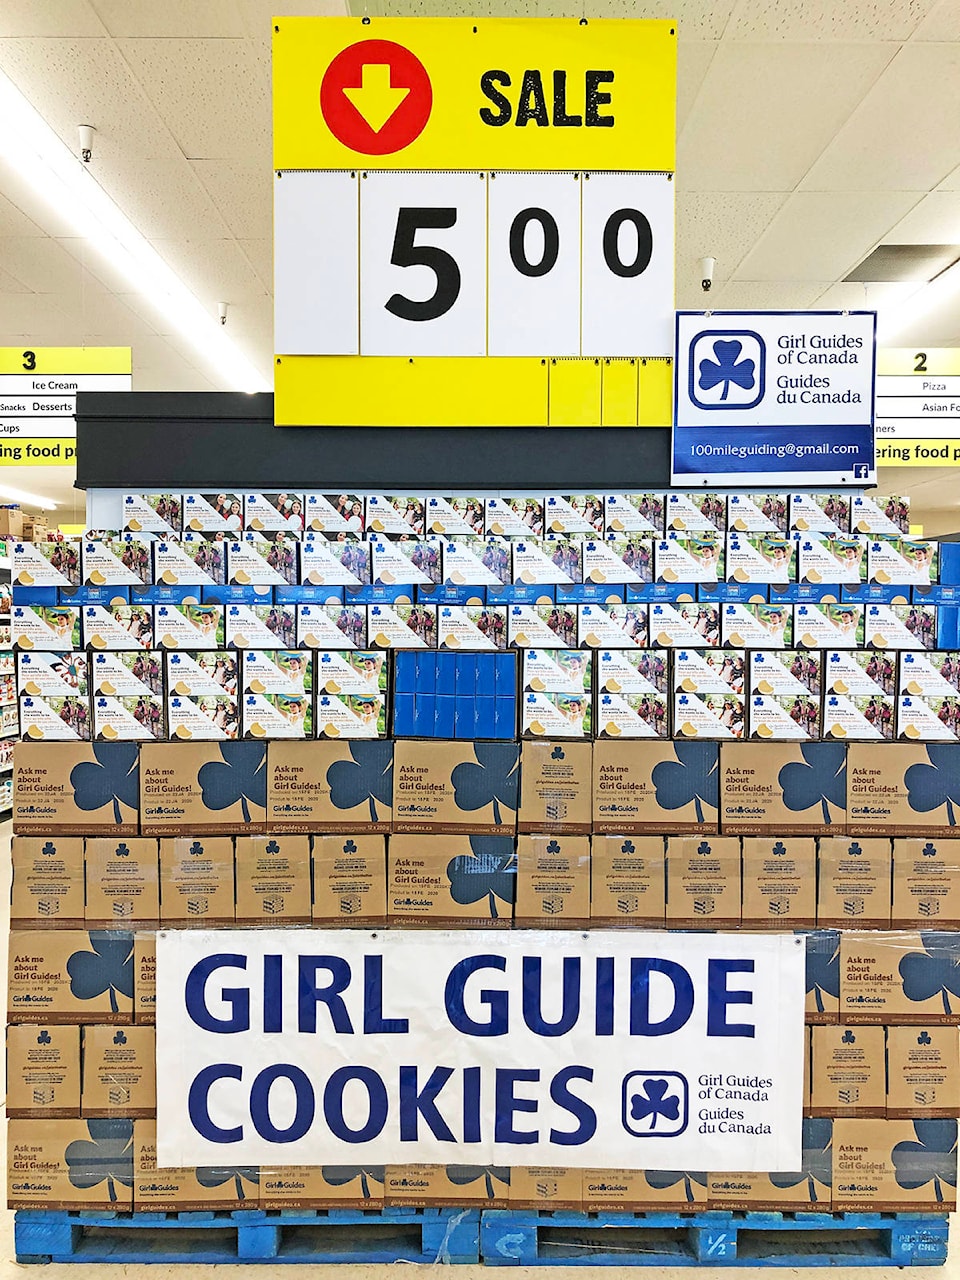 21442963_web1_Freshco-Selling-Girl-Guide-Cookiees_1